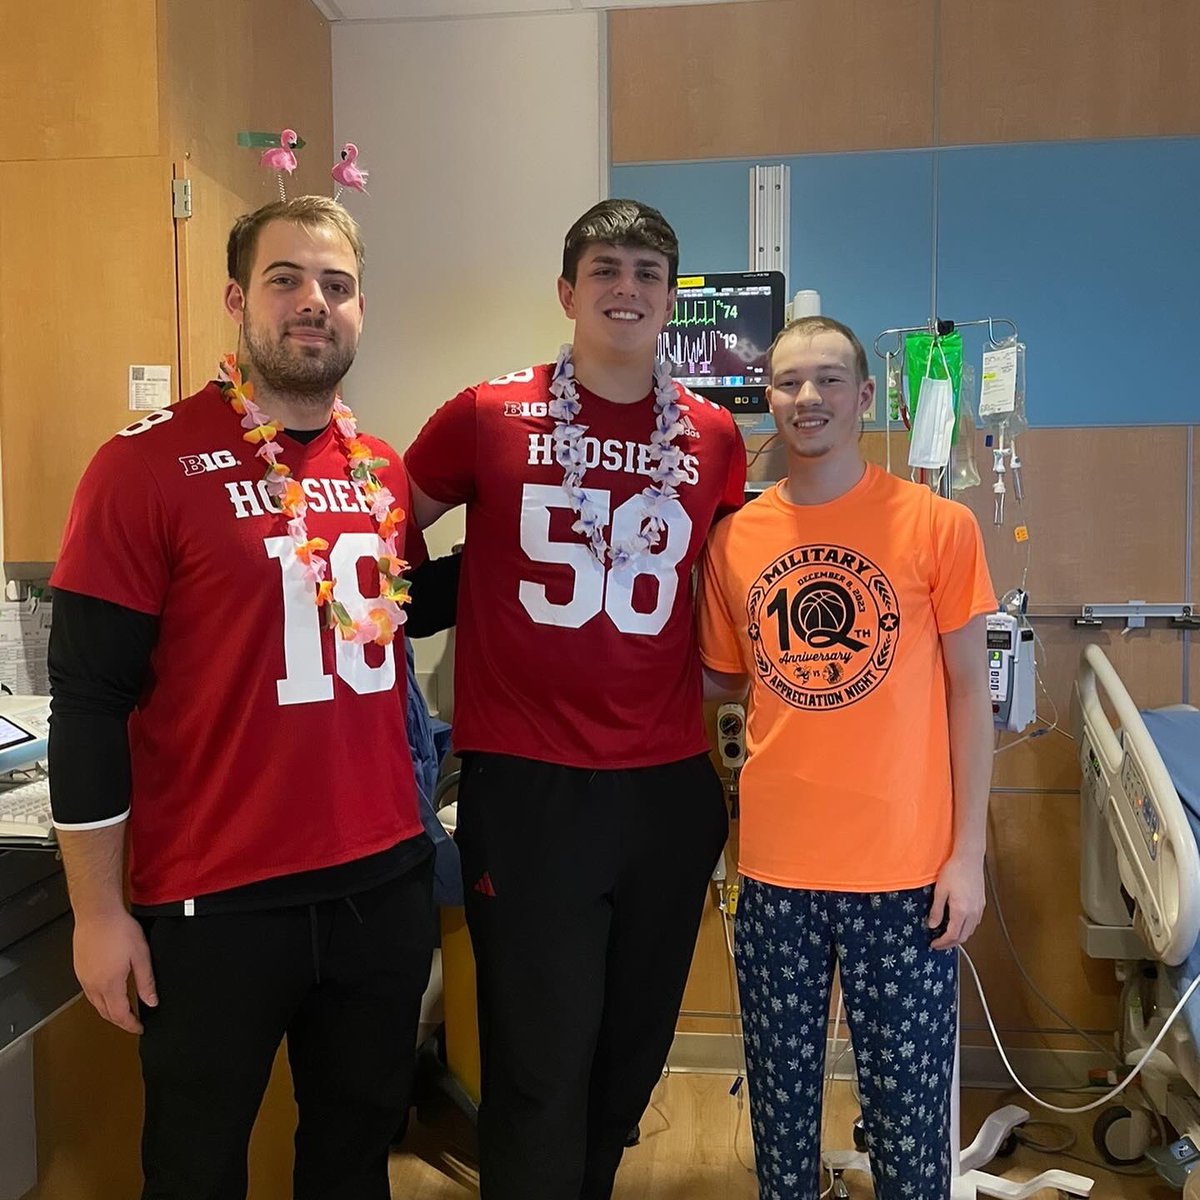 I am very grateful for meeting some amazing people at Riley Children’s Hospital and I admire the strength and courage that they possess. I feel extremely blessed and it is an honor to serve others. Thank you to those who helped me make this opportunity possible, I appreciate it.